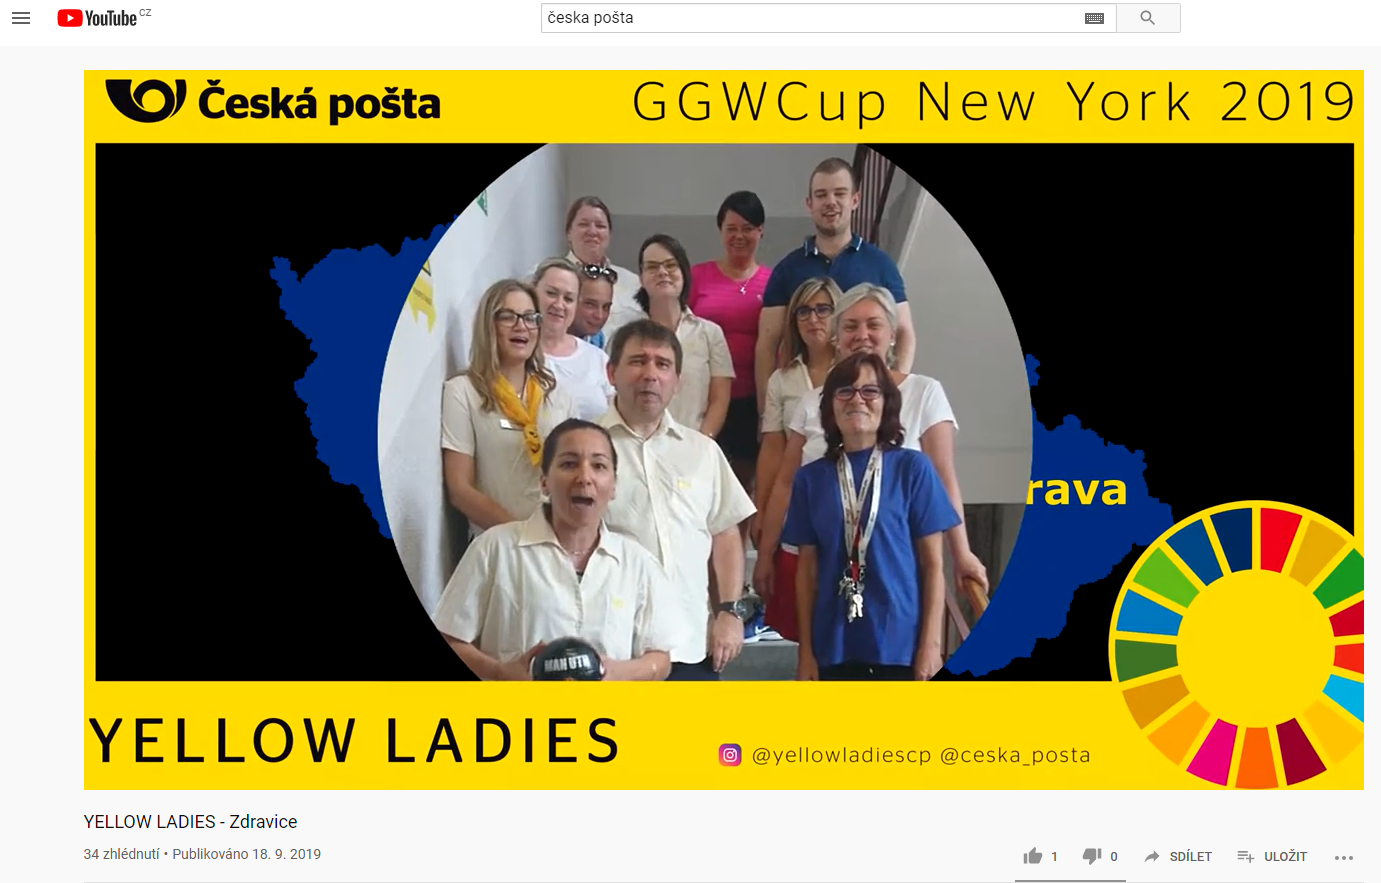 GGWCyp NYC 2019 Team Yellow Ladies_yt_18_9_2019_2.png